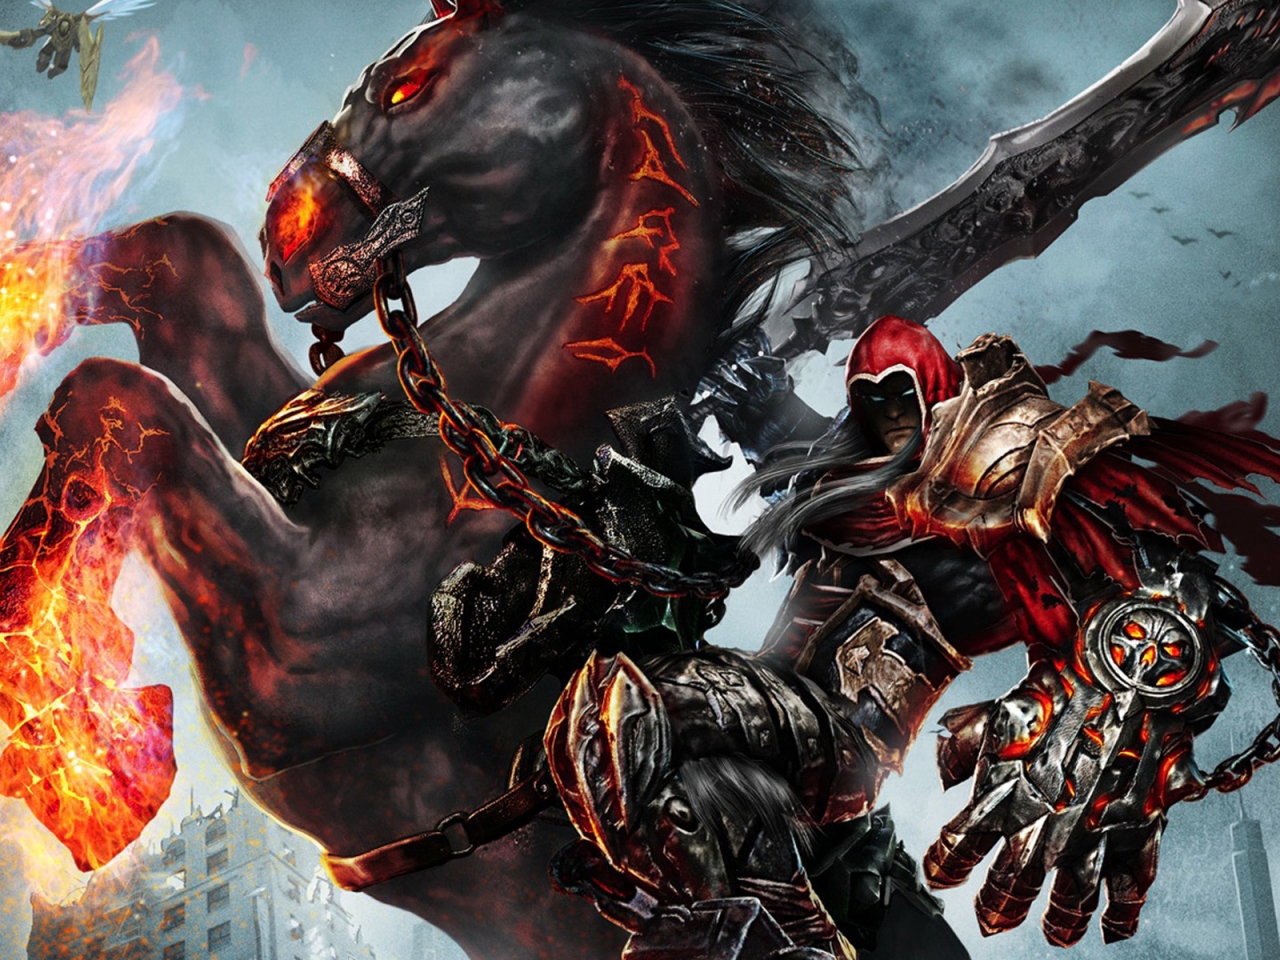 Darksiders Wrath of War Video Game for 1280 x 960 resolution